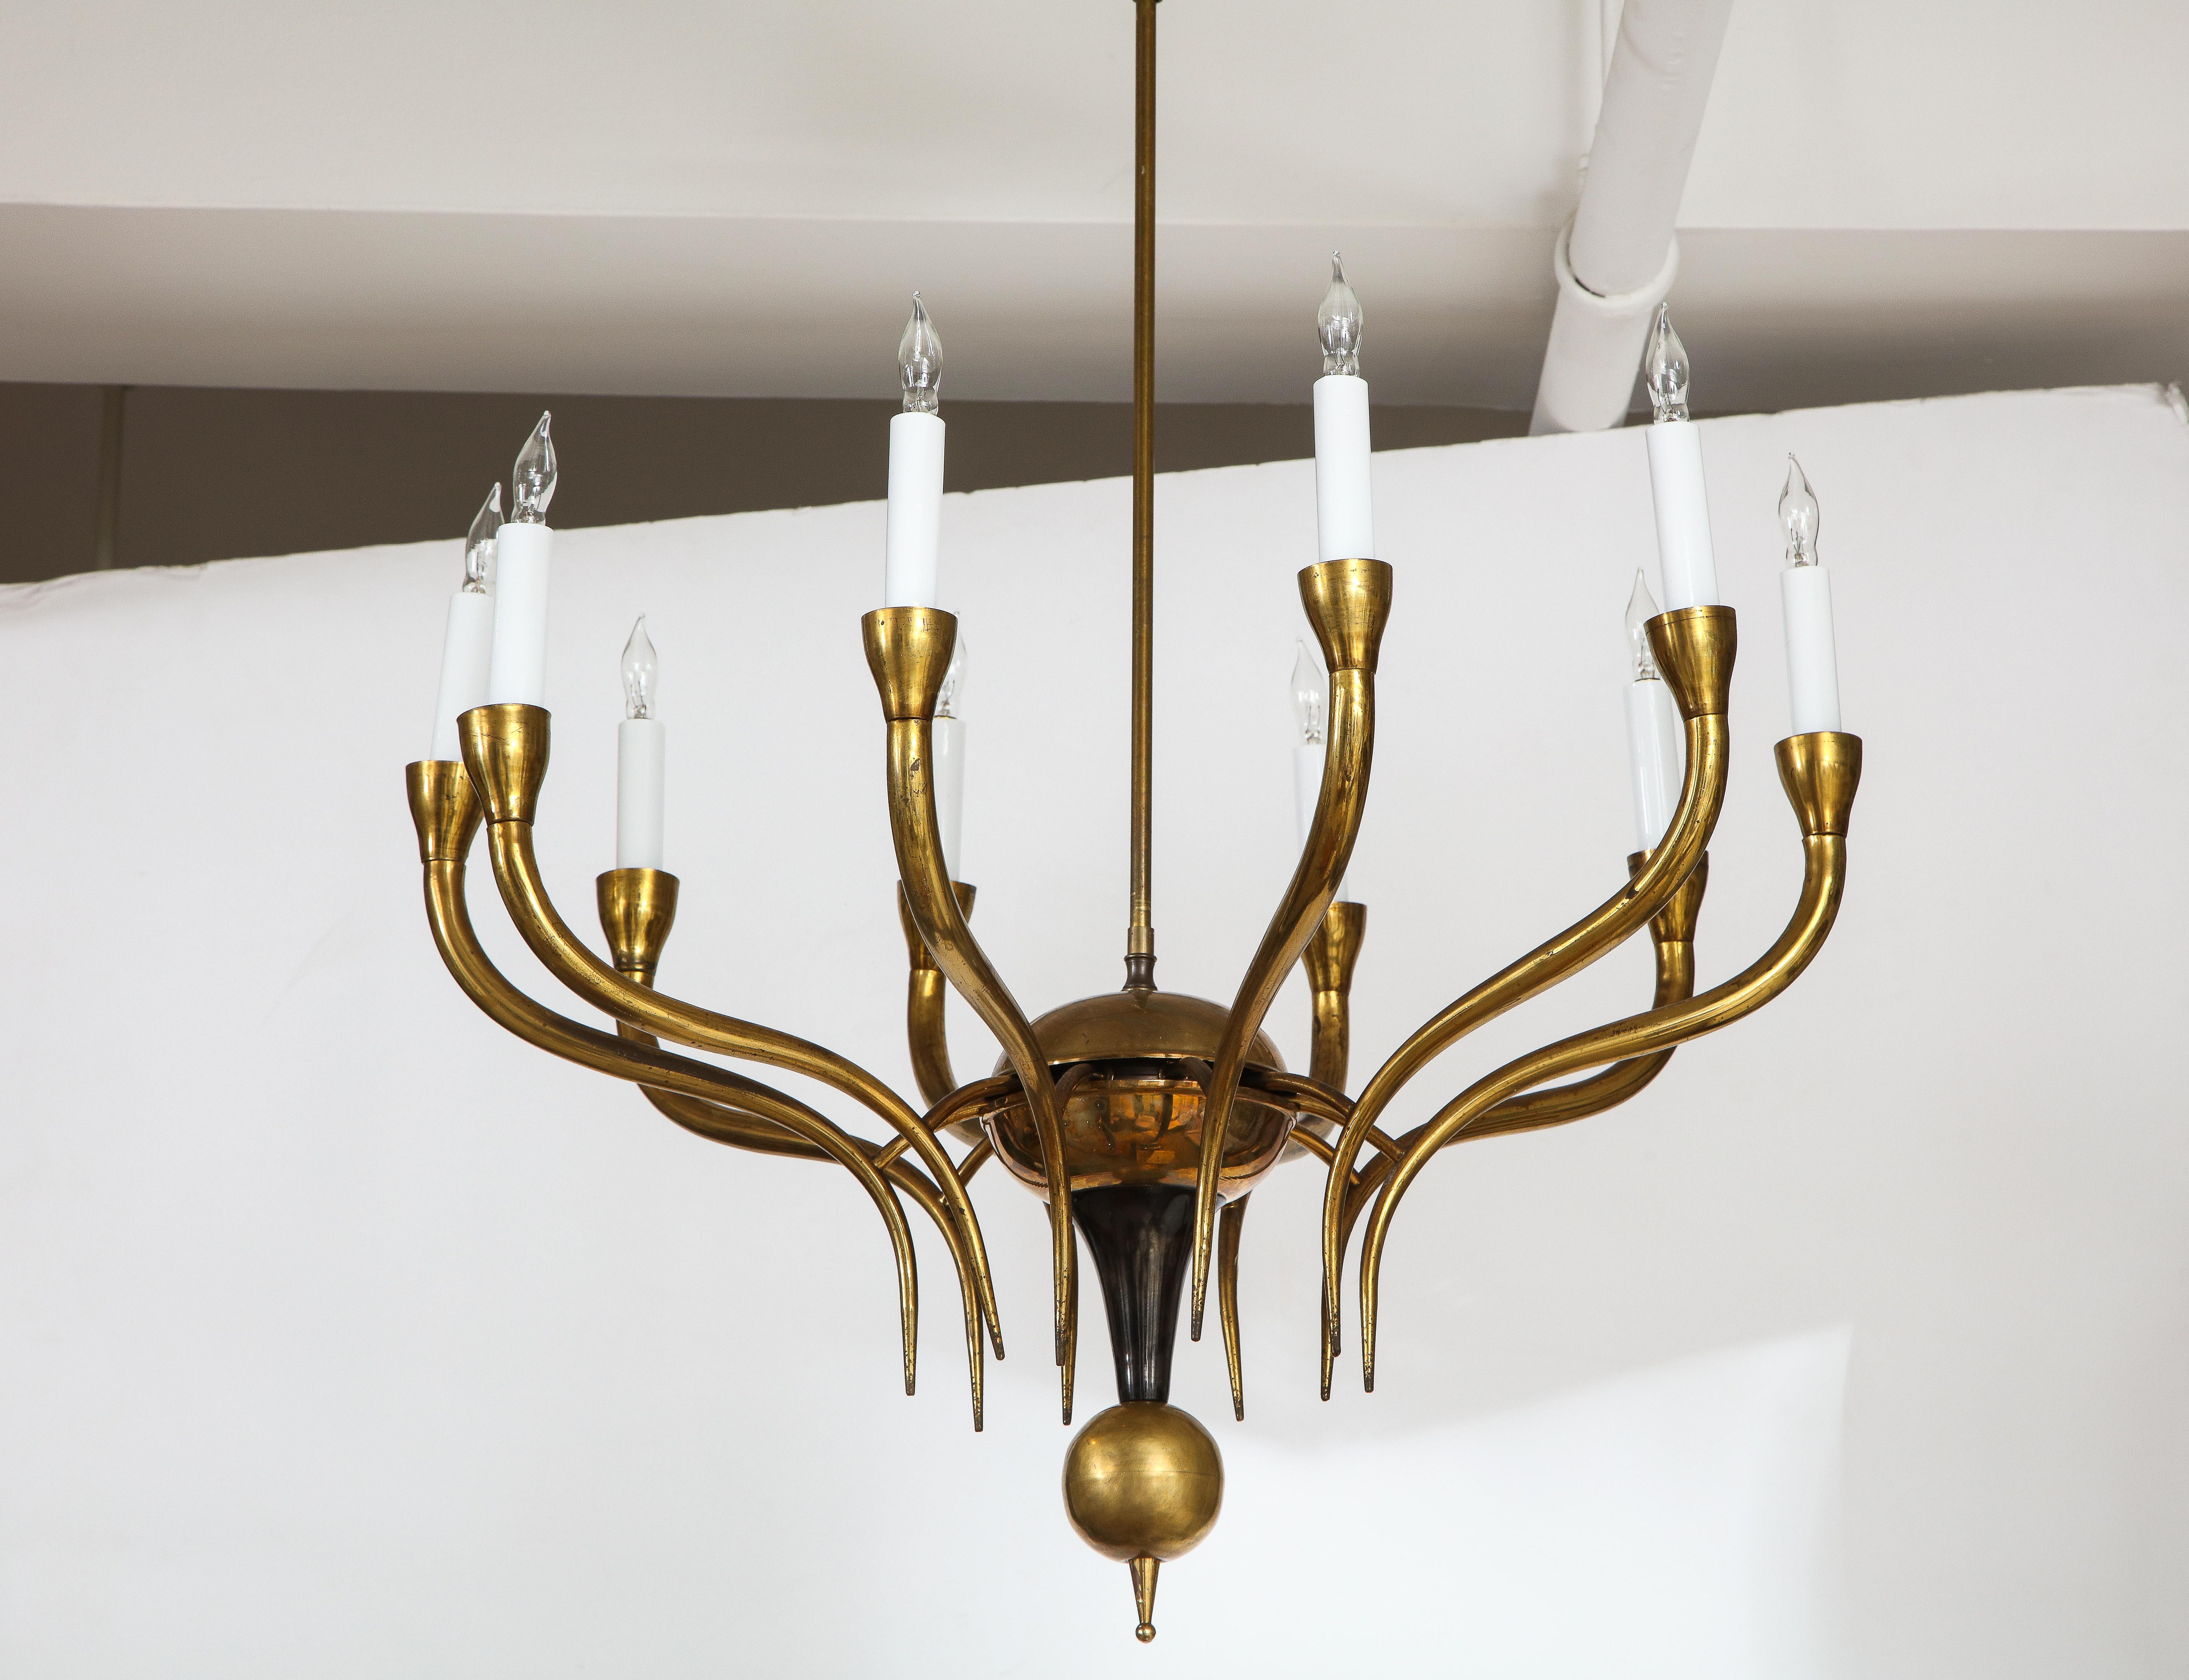 A simple and sophisticated Italian vintage brass chandelier consisting of ten elegantly outstretched arms extending from a circular central support, with a brass ball finial at its base, underneath a painted black metal geometric shape connecting